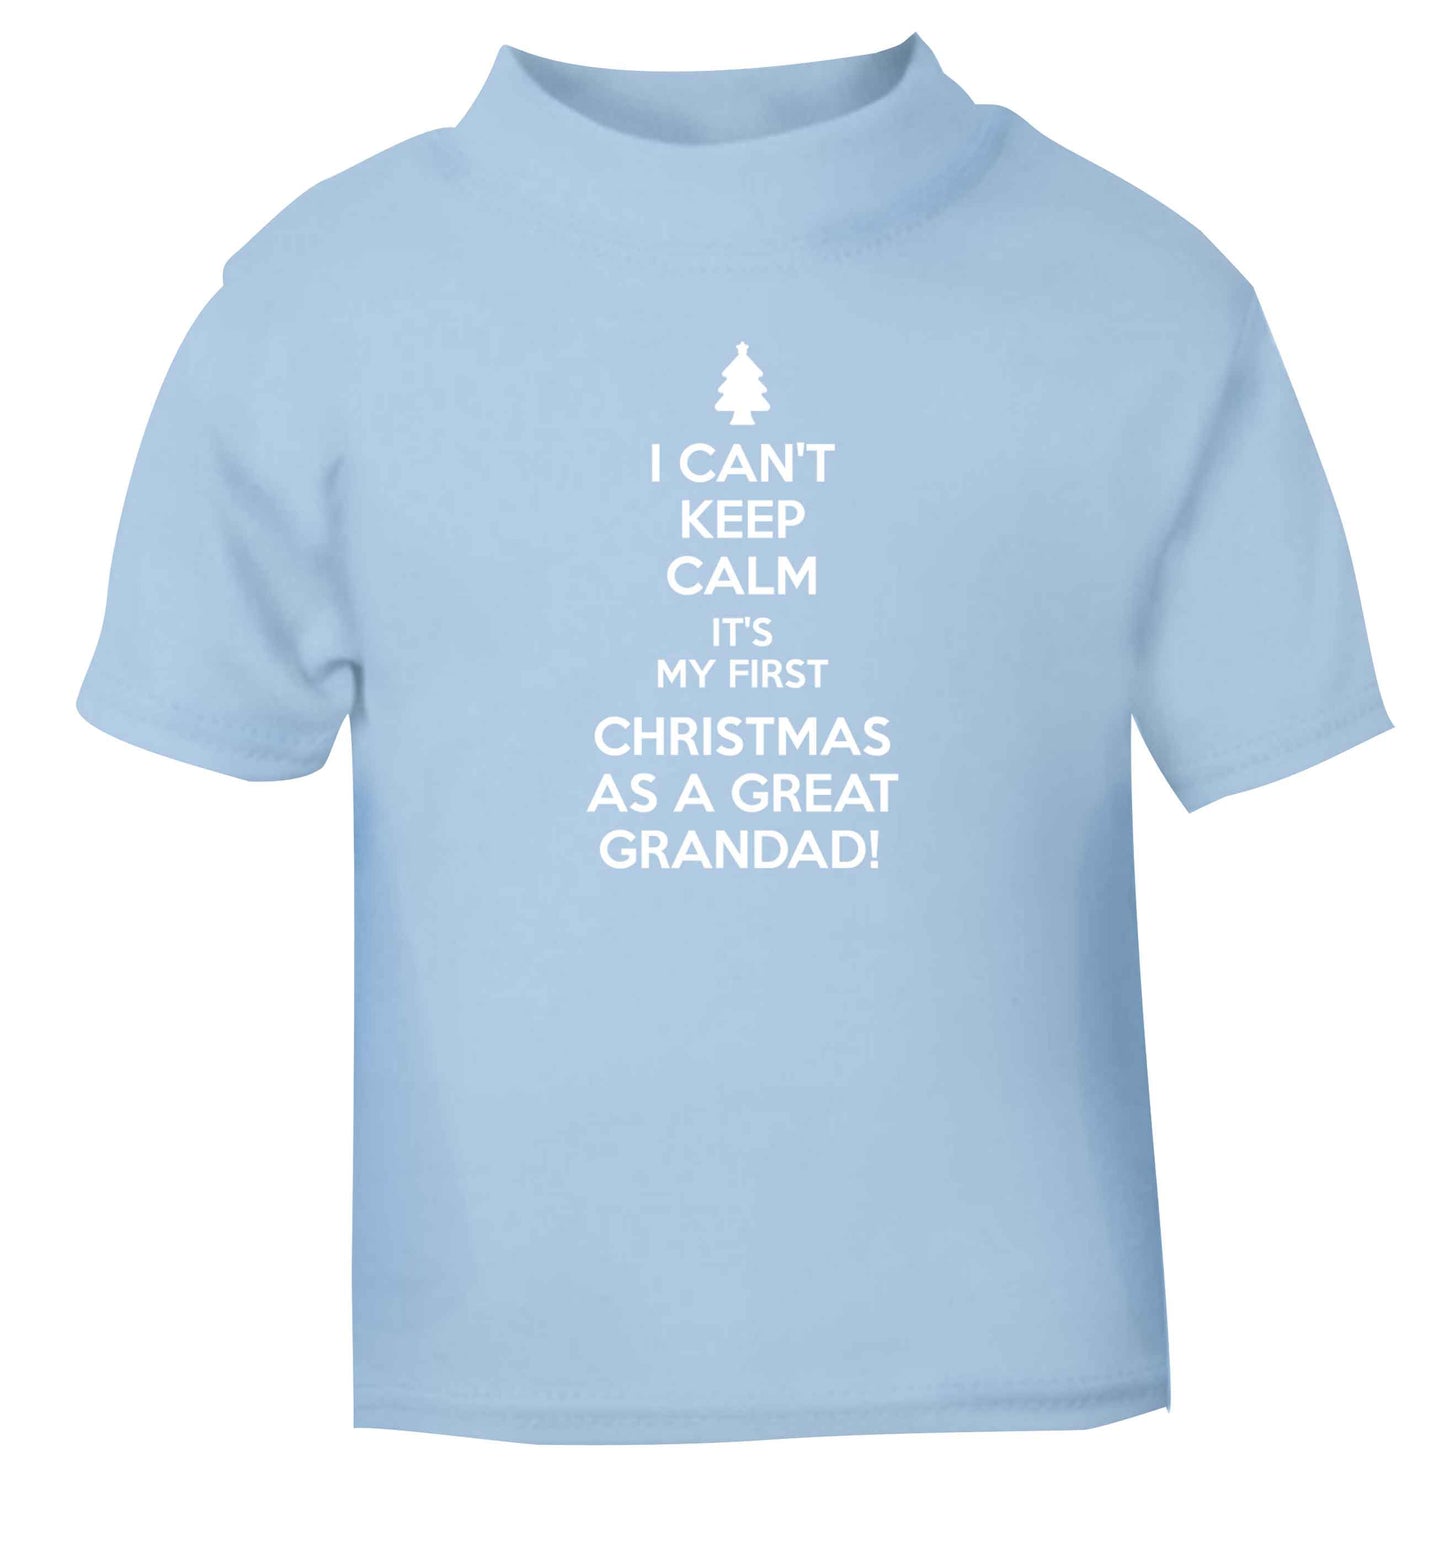 I can't keep calm it's my first Christmas as a great grandad! light blue Baby Toddler Tshirt 2 Years